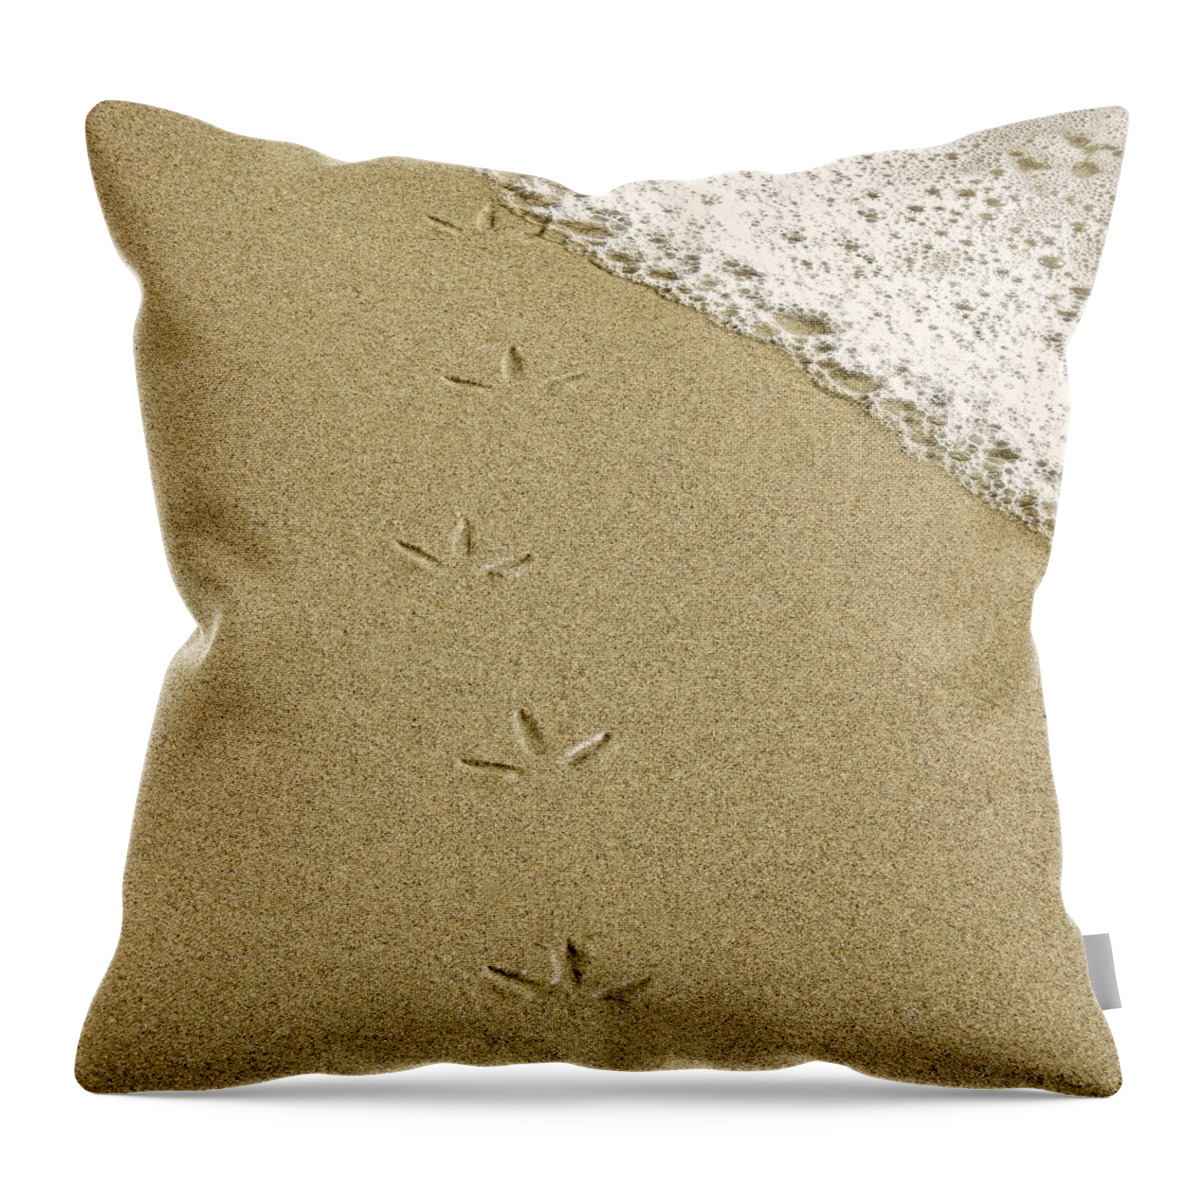 Footprints Throw Pillow featuring the photograph Birdprints in the Sand by Beth Myer Photography